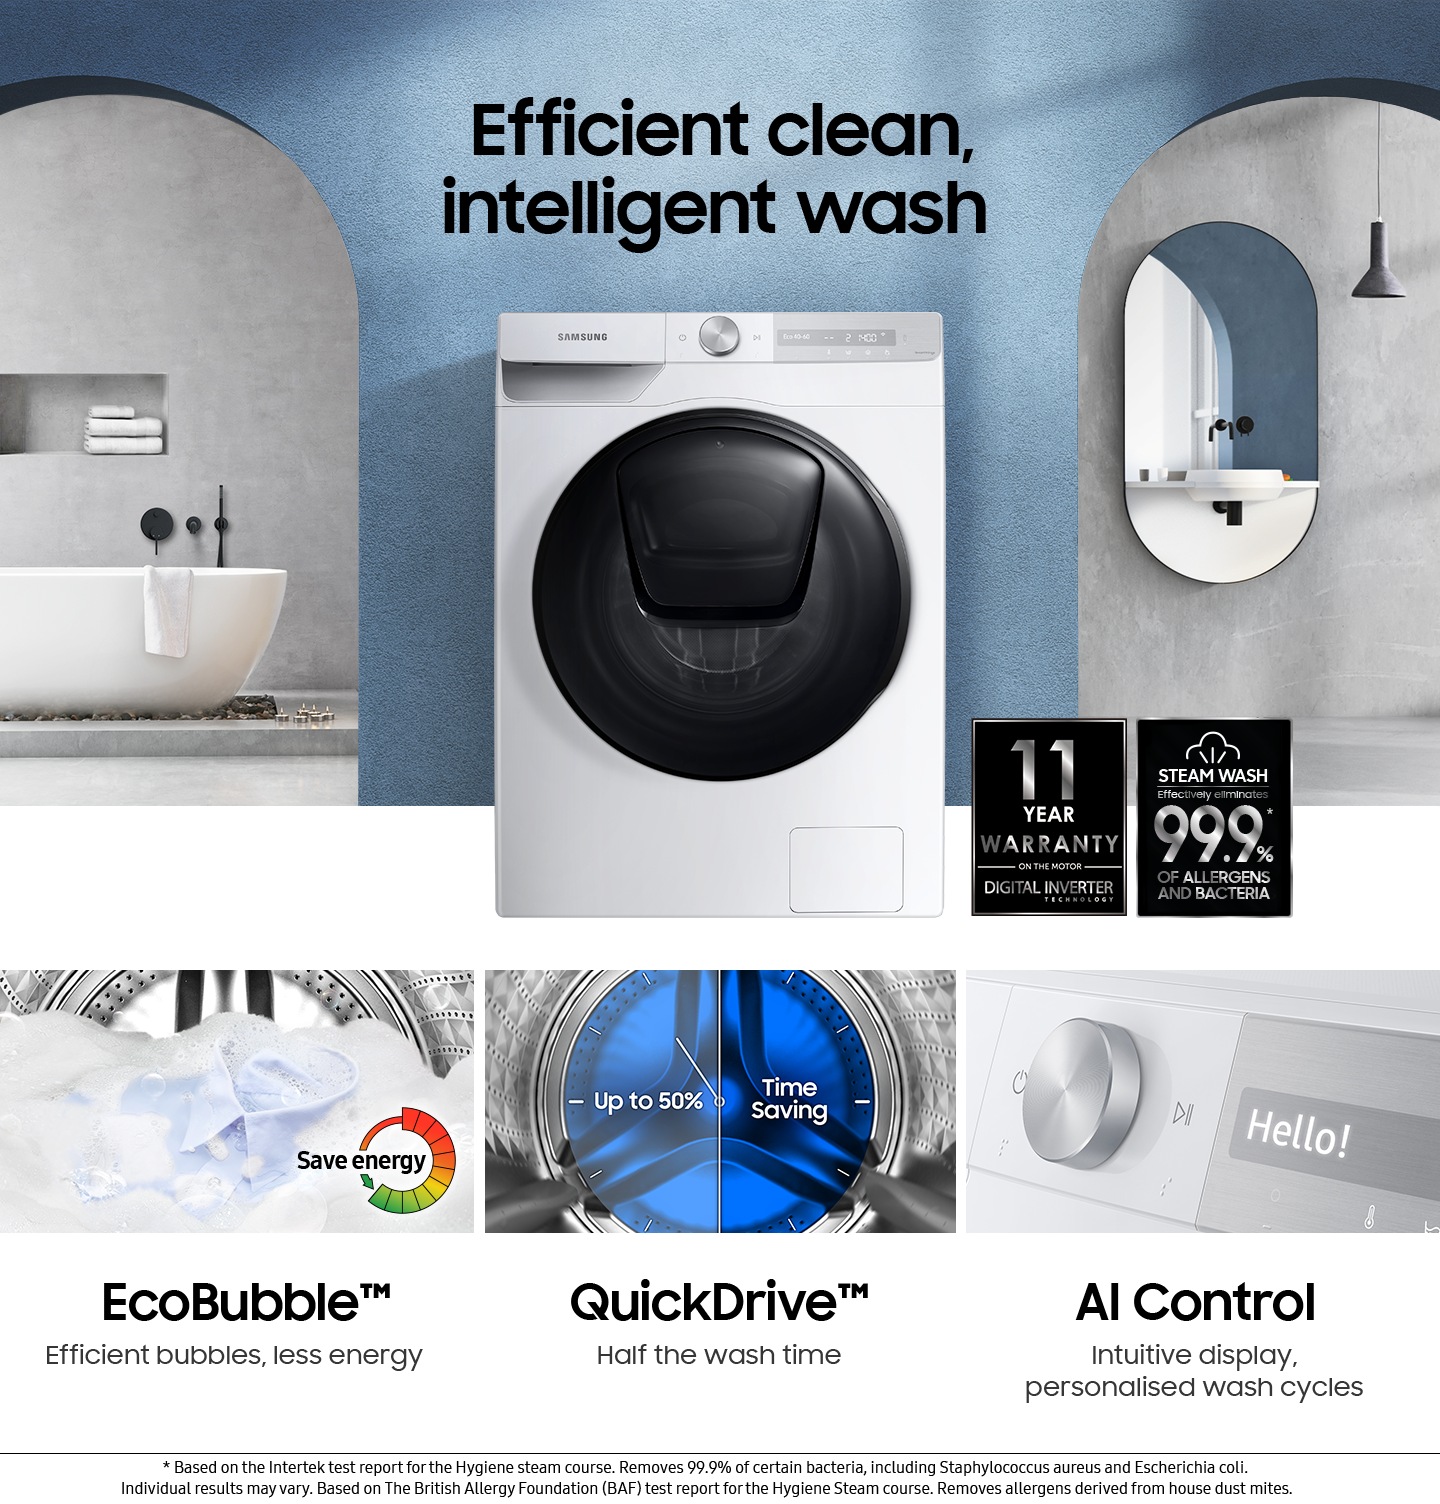 WW7500T is germ-free, and 10-year warranty with EcoBubble, QuickDrive, and AI Control functions.